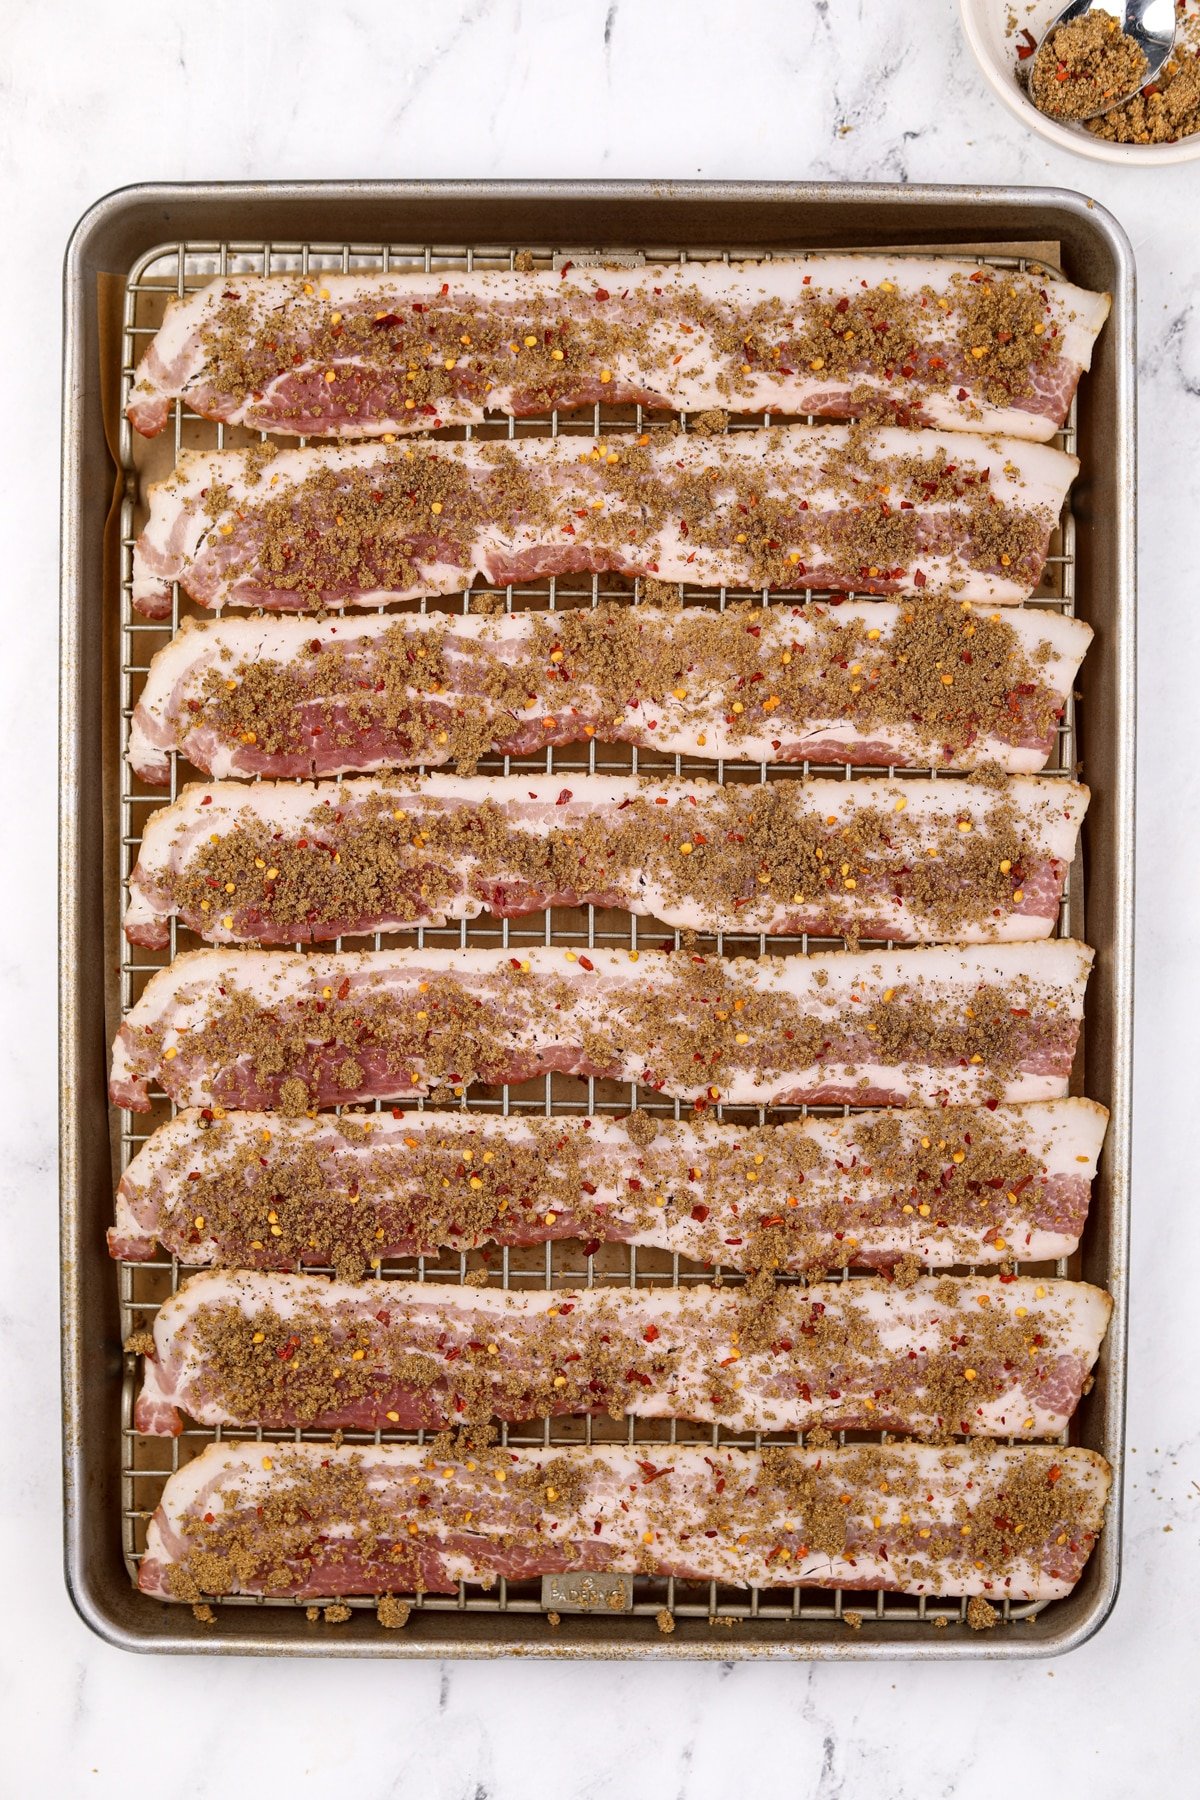 A baking sheet filled with bacon that has been sprinkled with brown sugar.